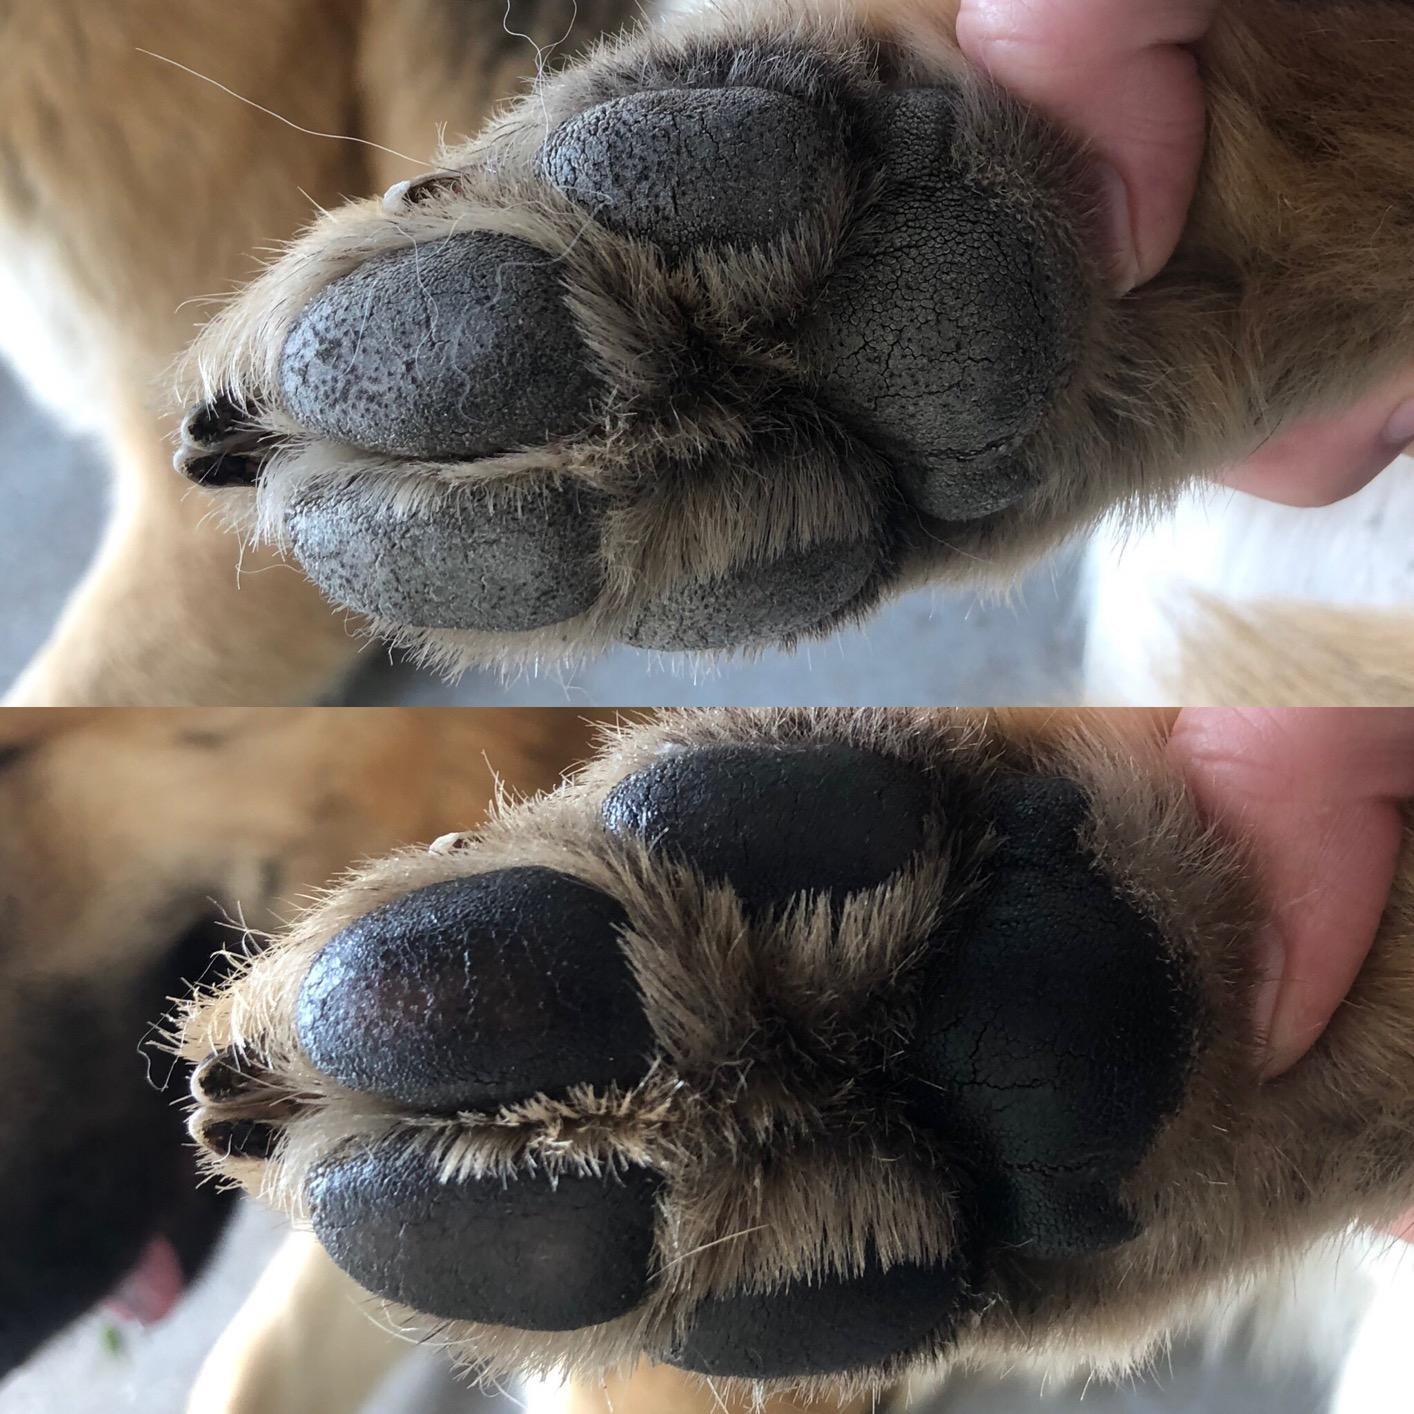 A reviewer&#x27;s dog&#x27;s paw with grey, dry-looking toe beans before, and moisturized healthy looking ones after